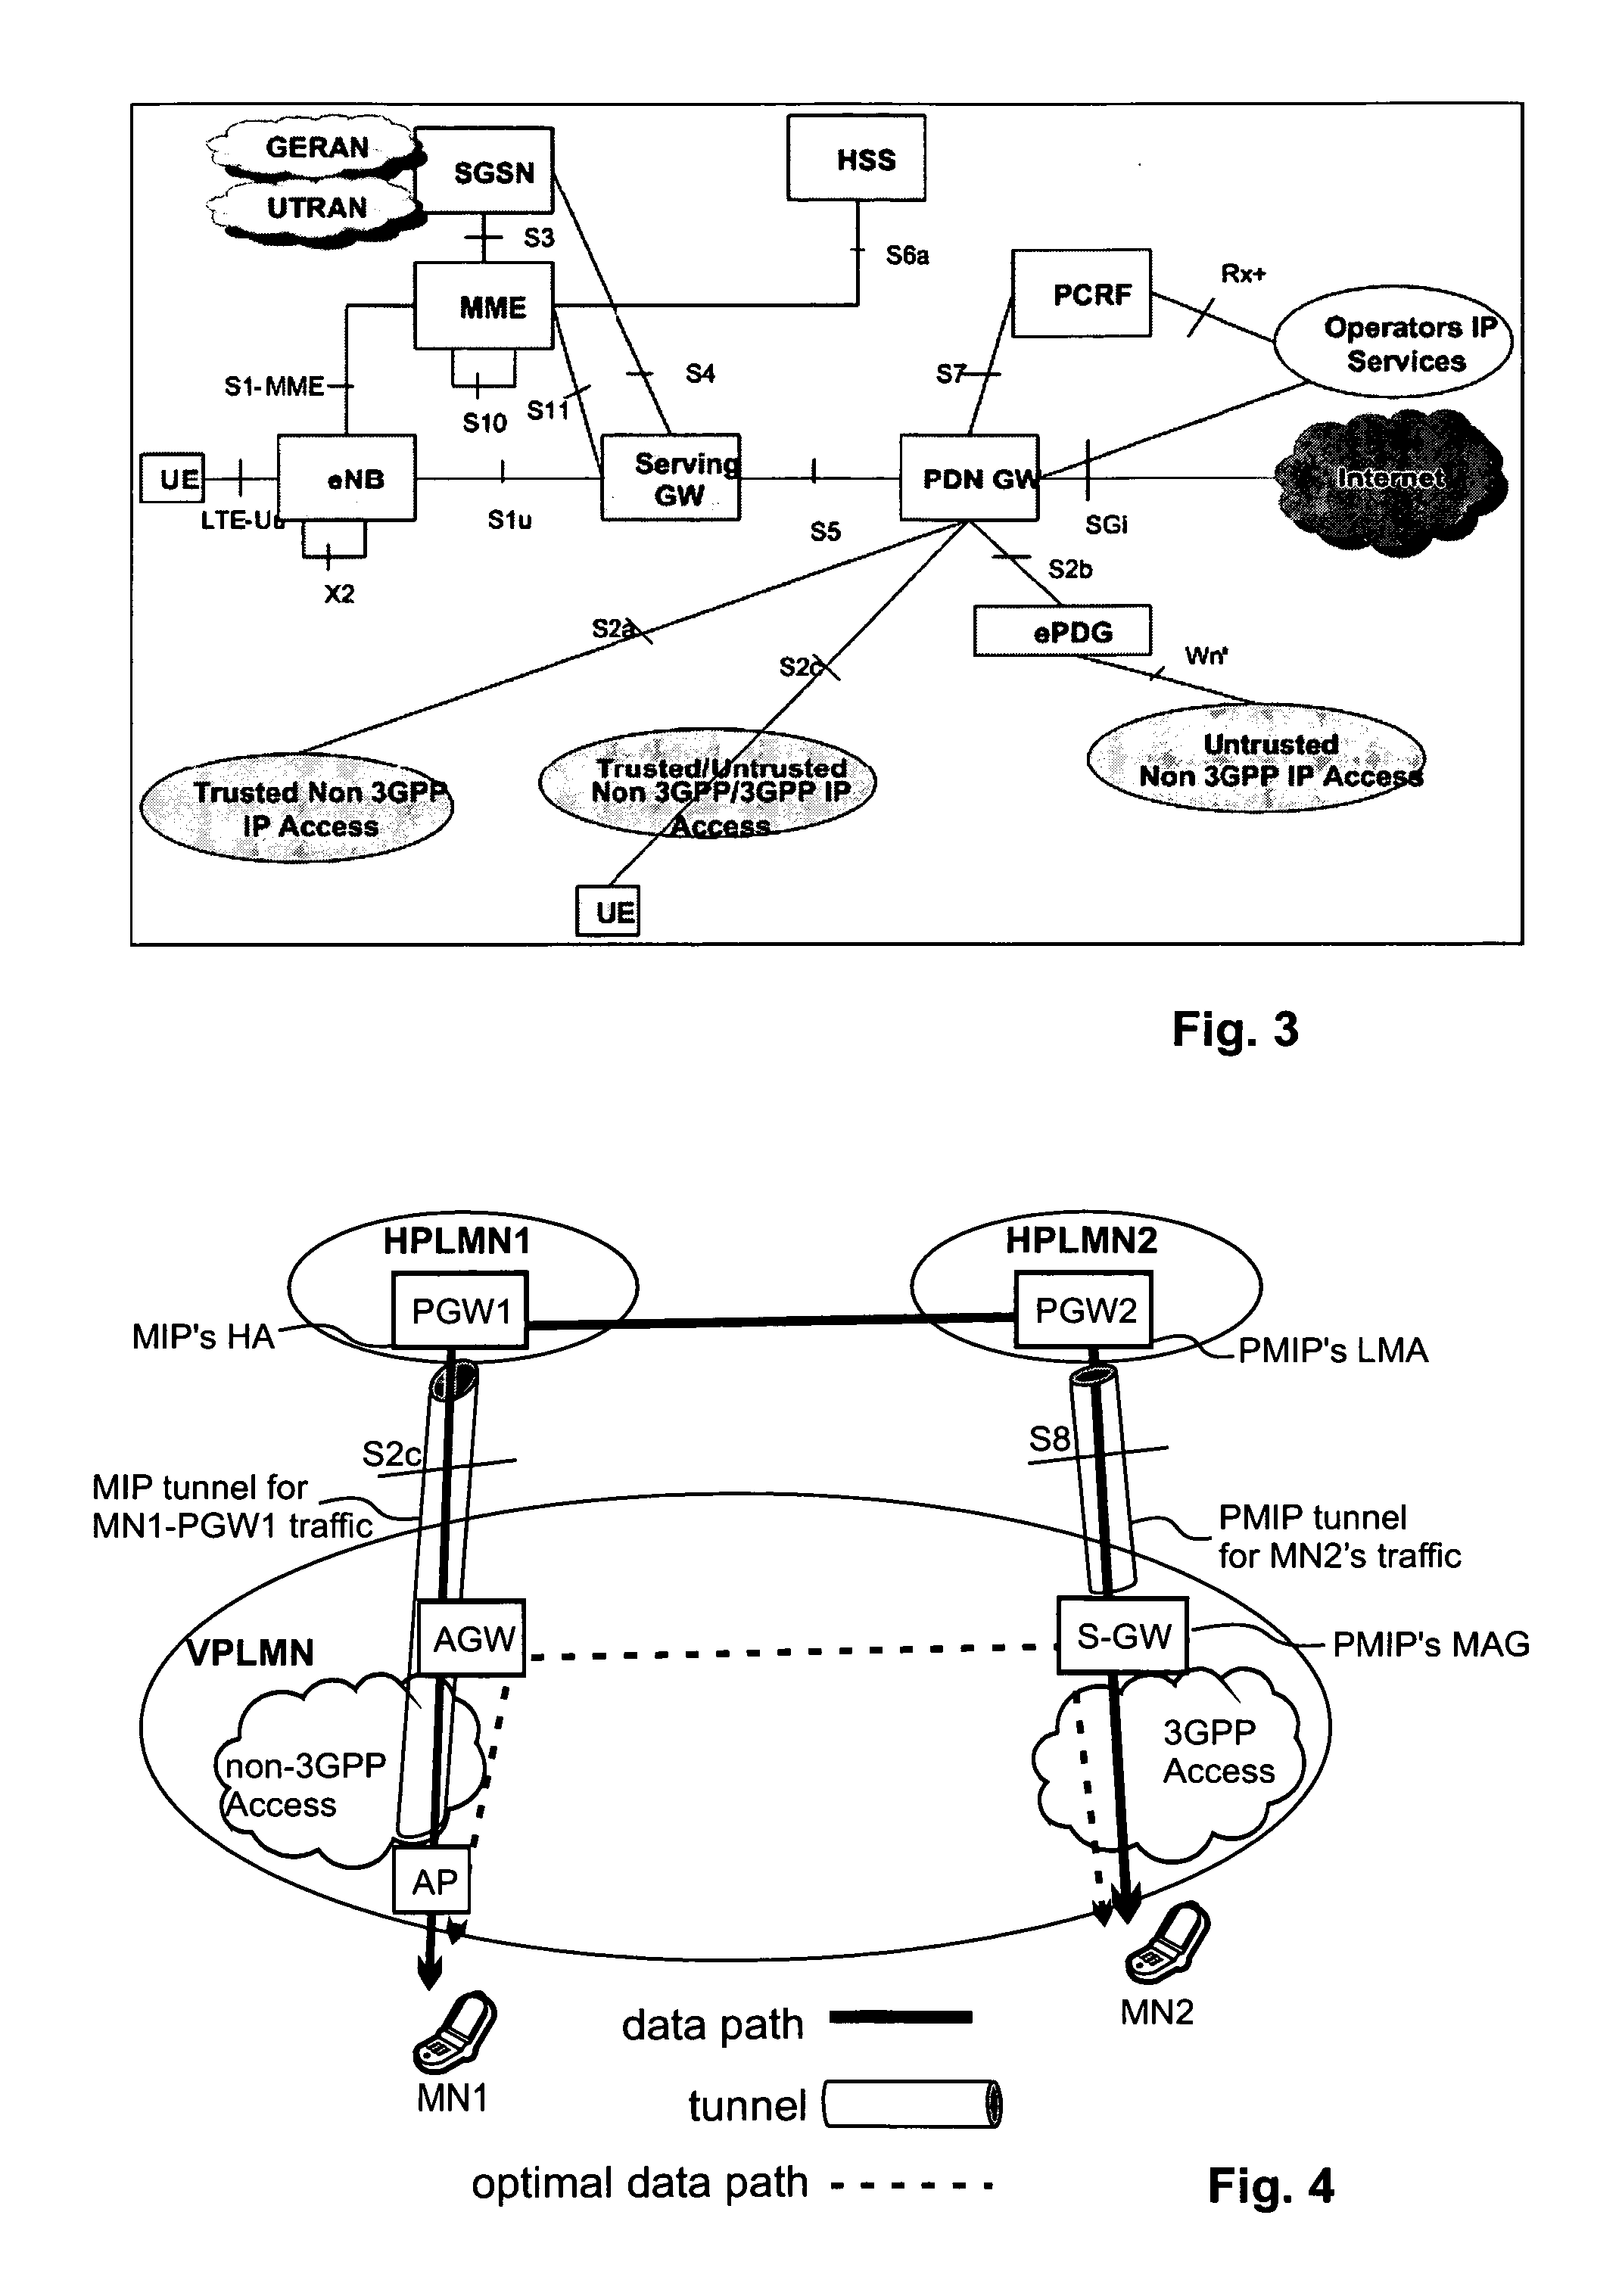 Route optimization of a data path between communicating nodes using a route optimization agent